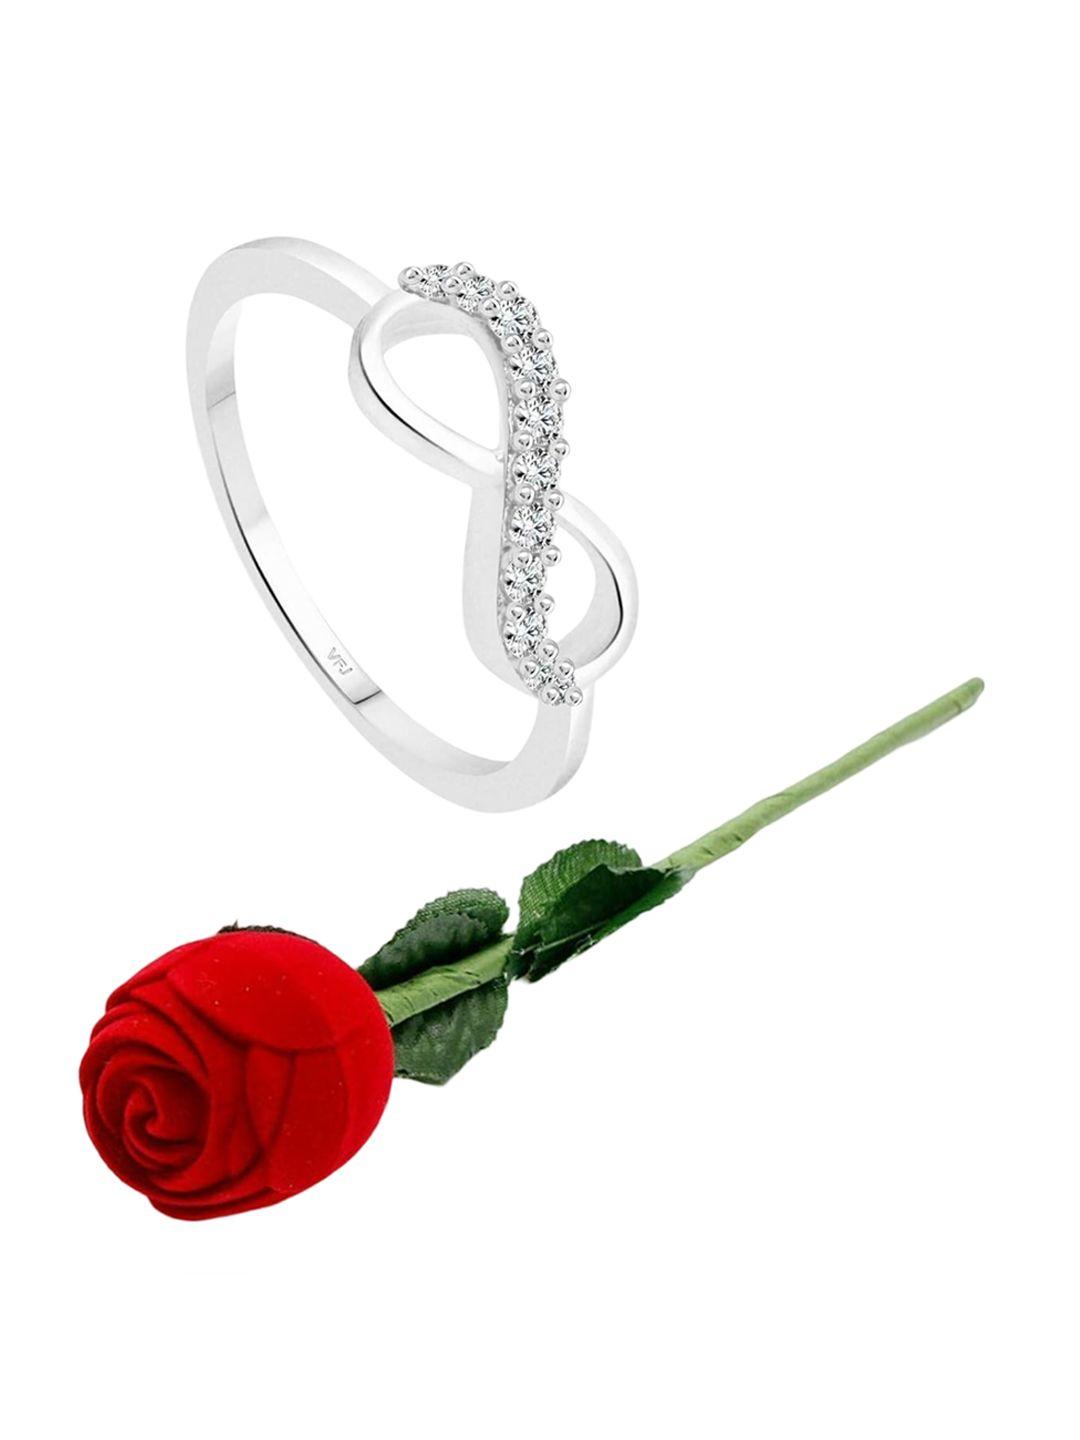 vighnaharta rhodium-plated cz-stone studded infinity design finger ring with rose box